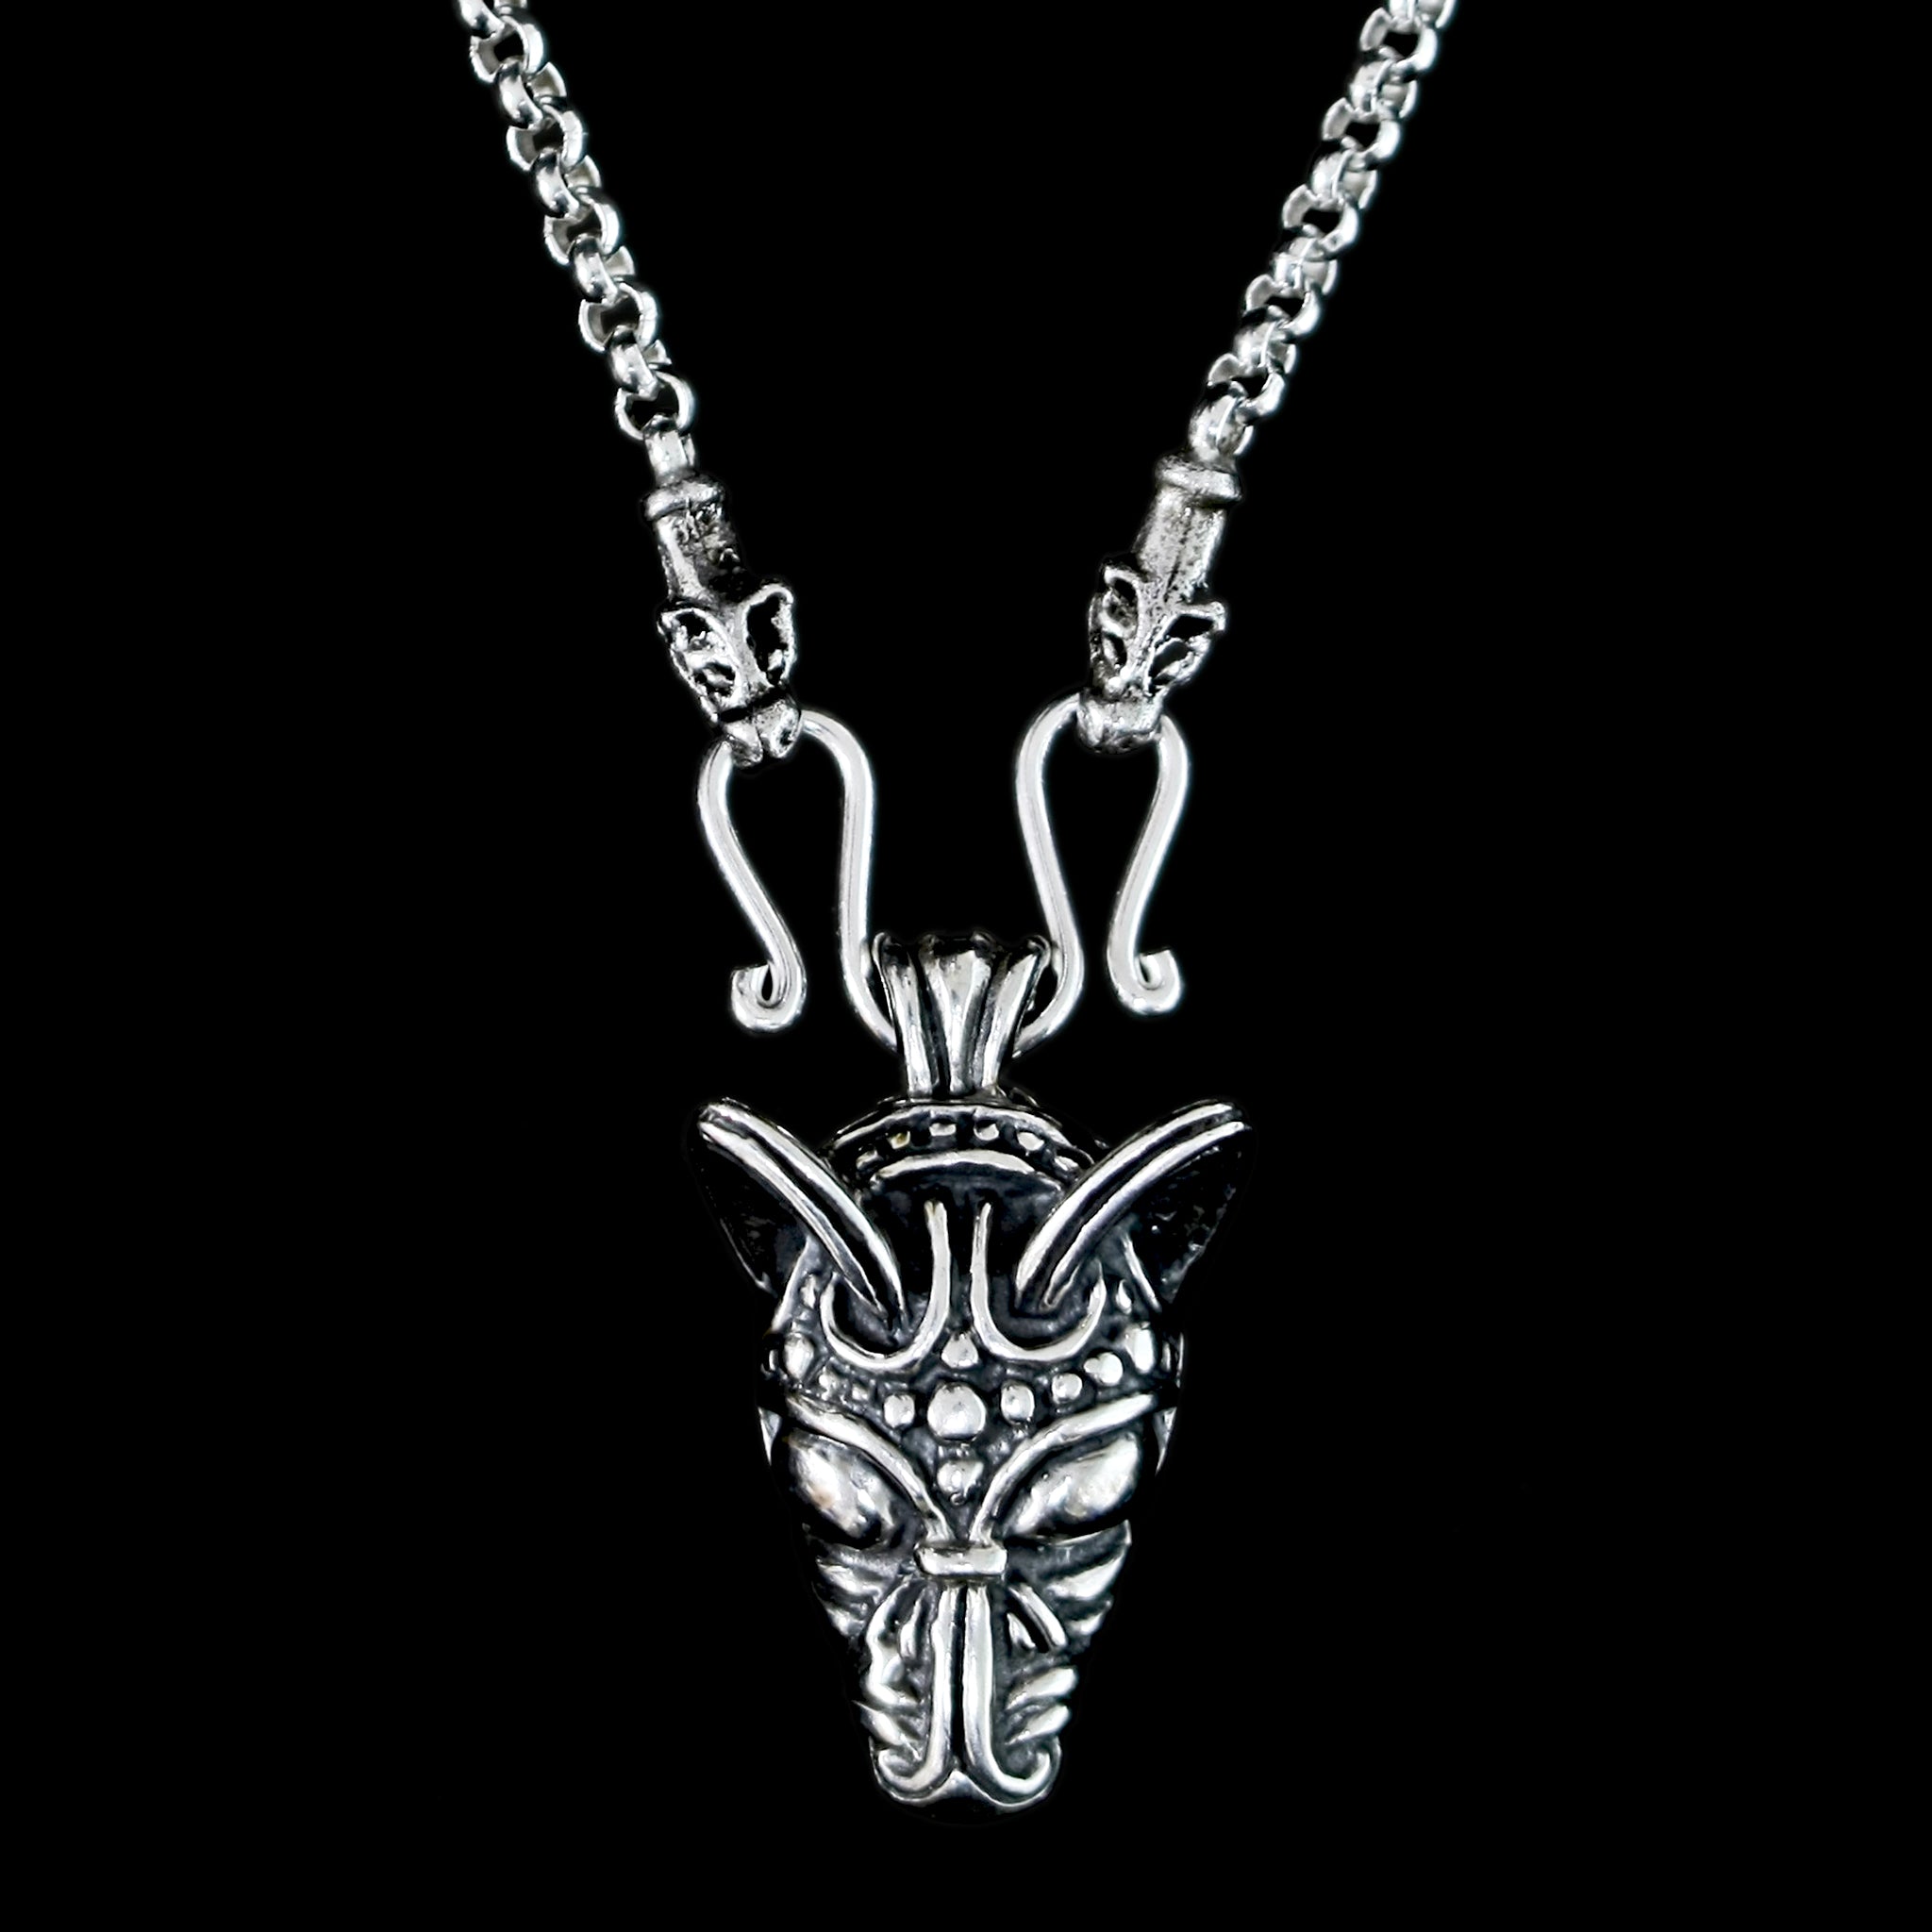 Slim Silver Anchor Chain Pendant Necklace with Icelandic Wolf Heads with Viking Wolf Head Pendant